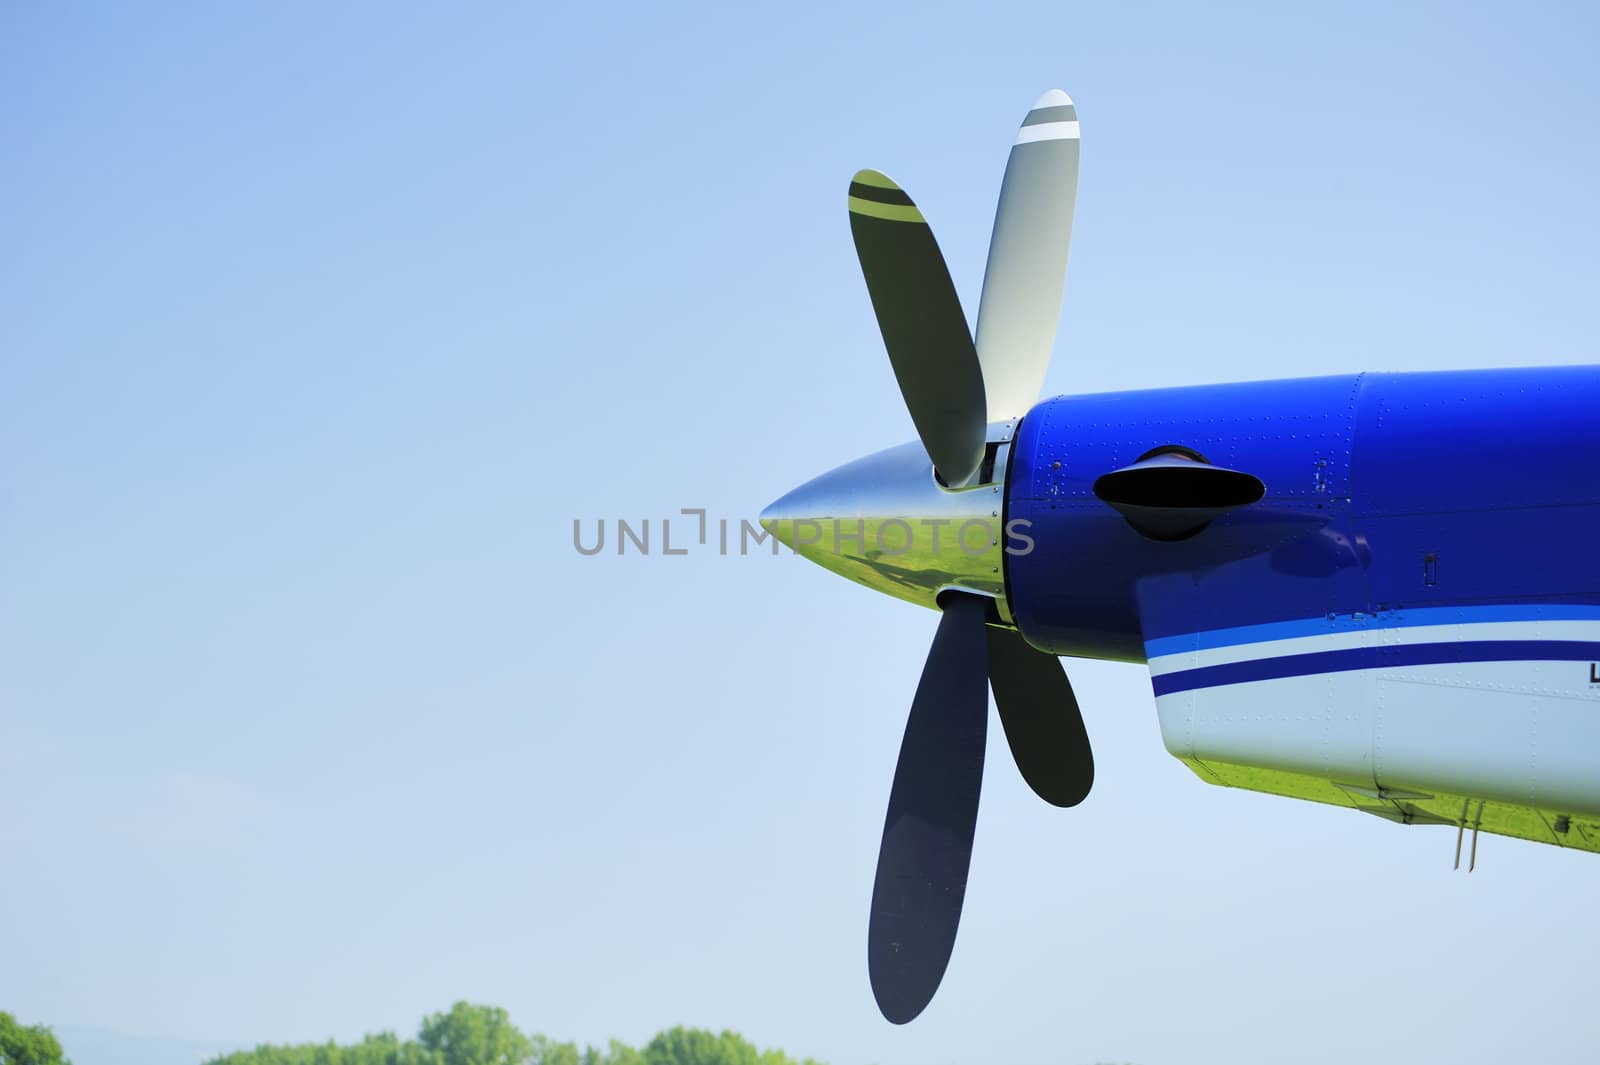 The propeller of an aircraft against a clear blue sky. The grass airstrip and sky can be seen reflected in the nose cone. Space for text in the blue sky.